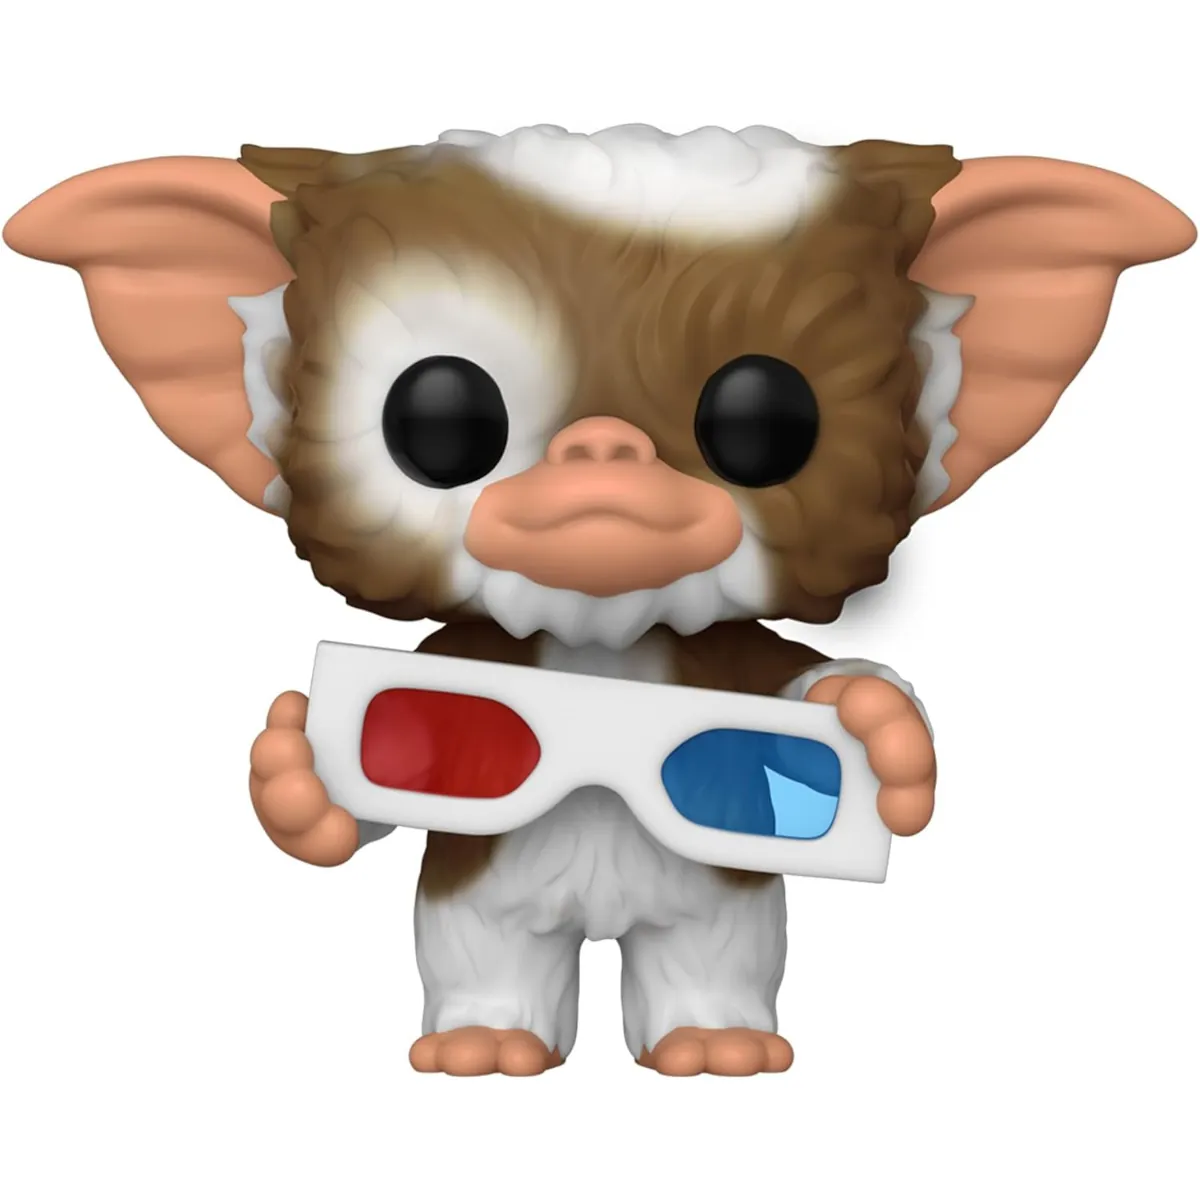 FK49888 Funko Pop! Movies - Gremlins - Gizmo with 3D Glasses Collectable Vinyl Figure